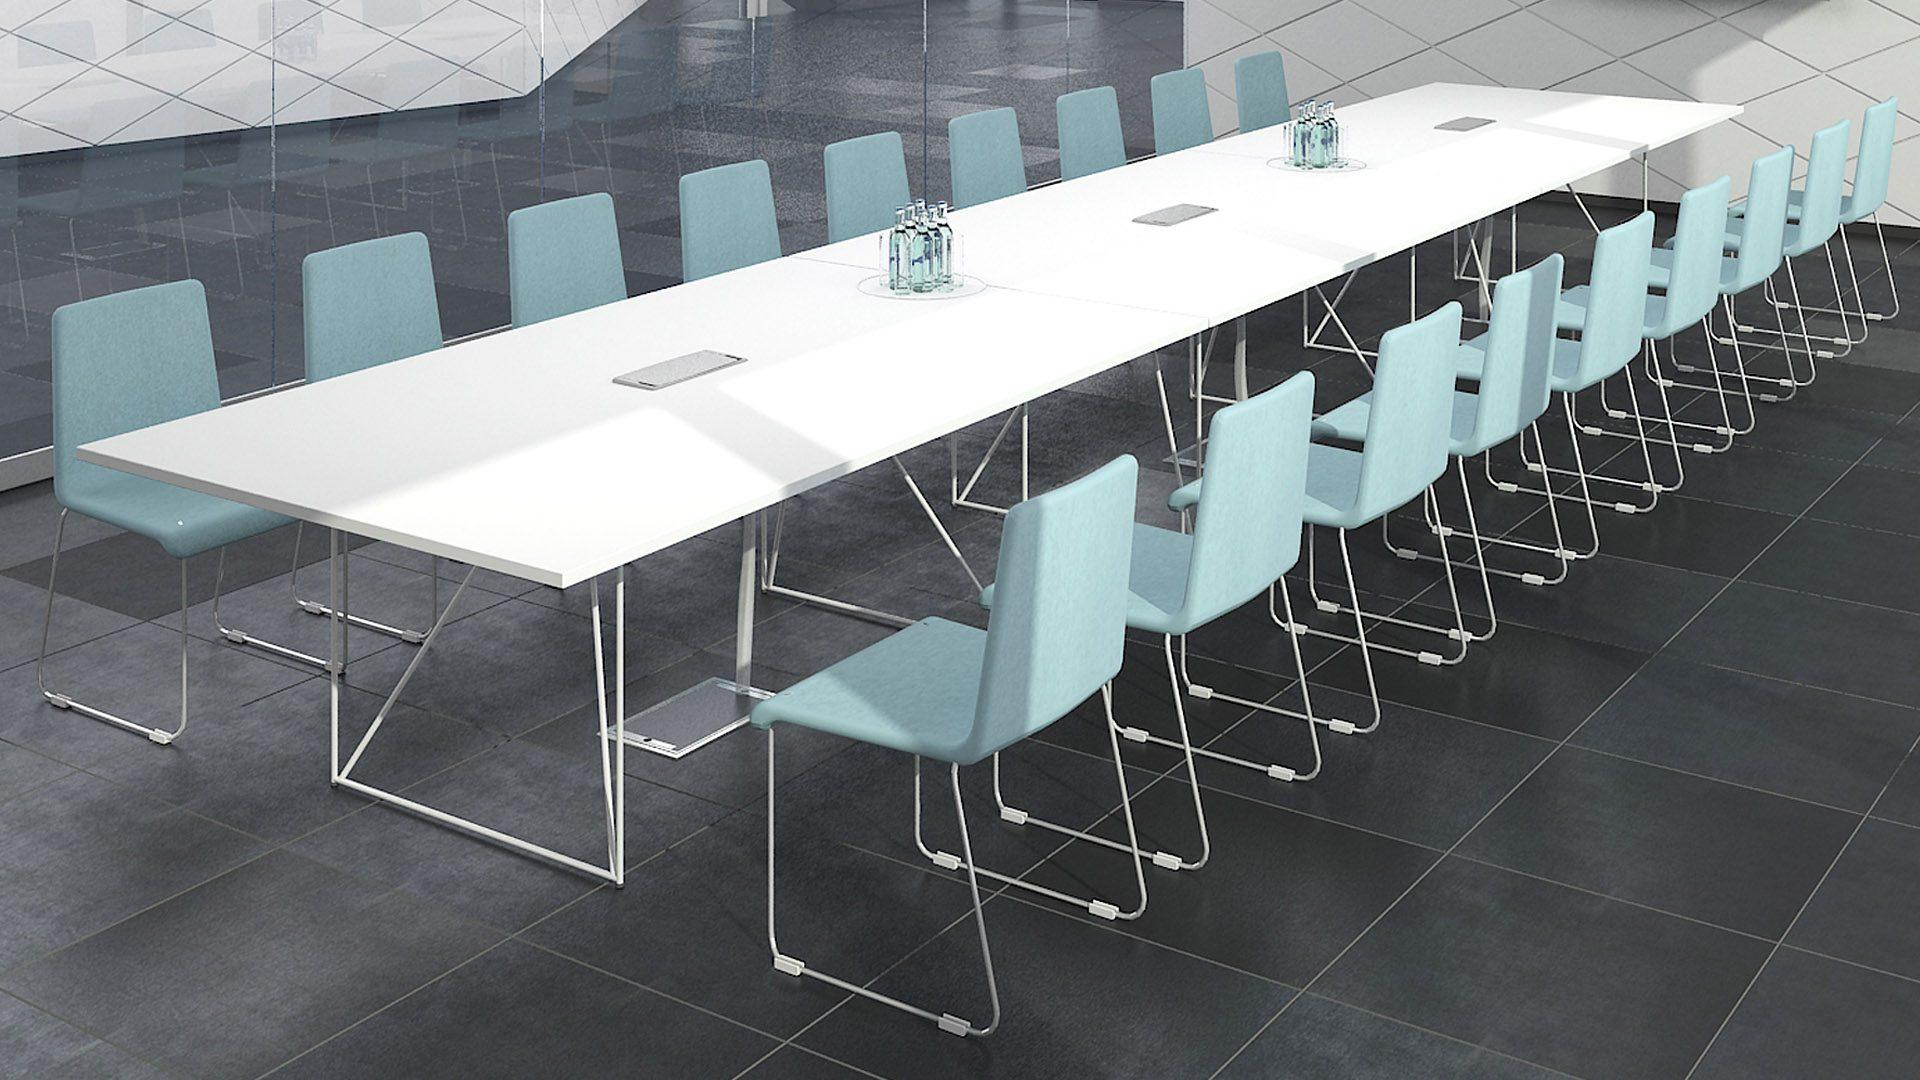 Air tables placed together to create one very long meeting table